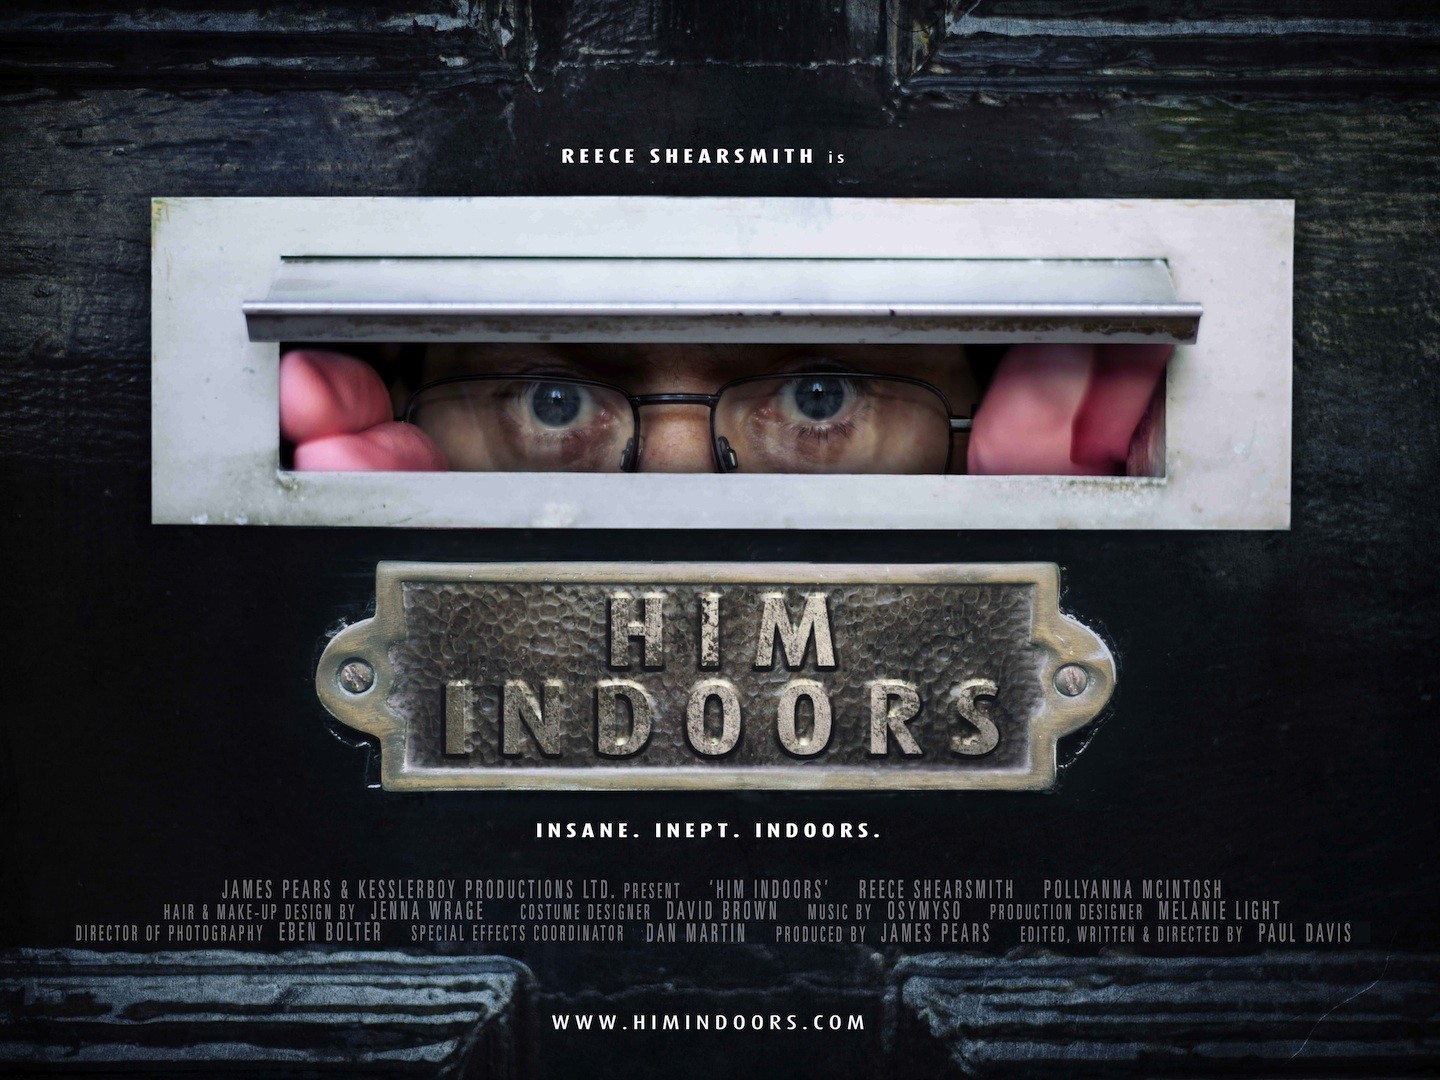 Extra Large Movie Poster Image for Him Indoors